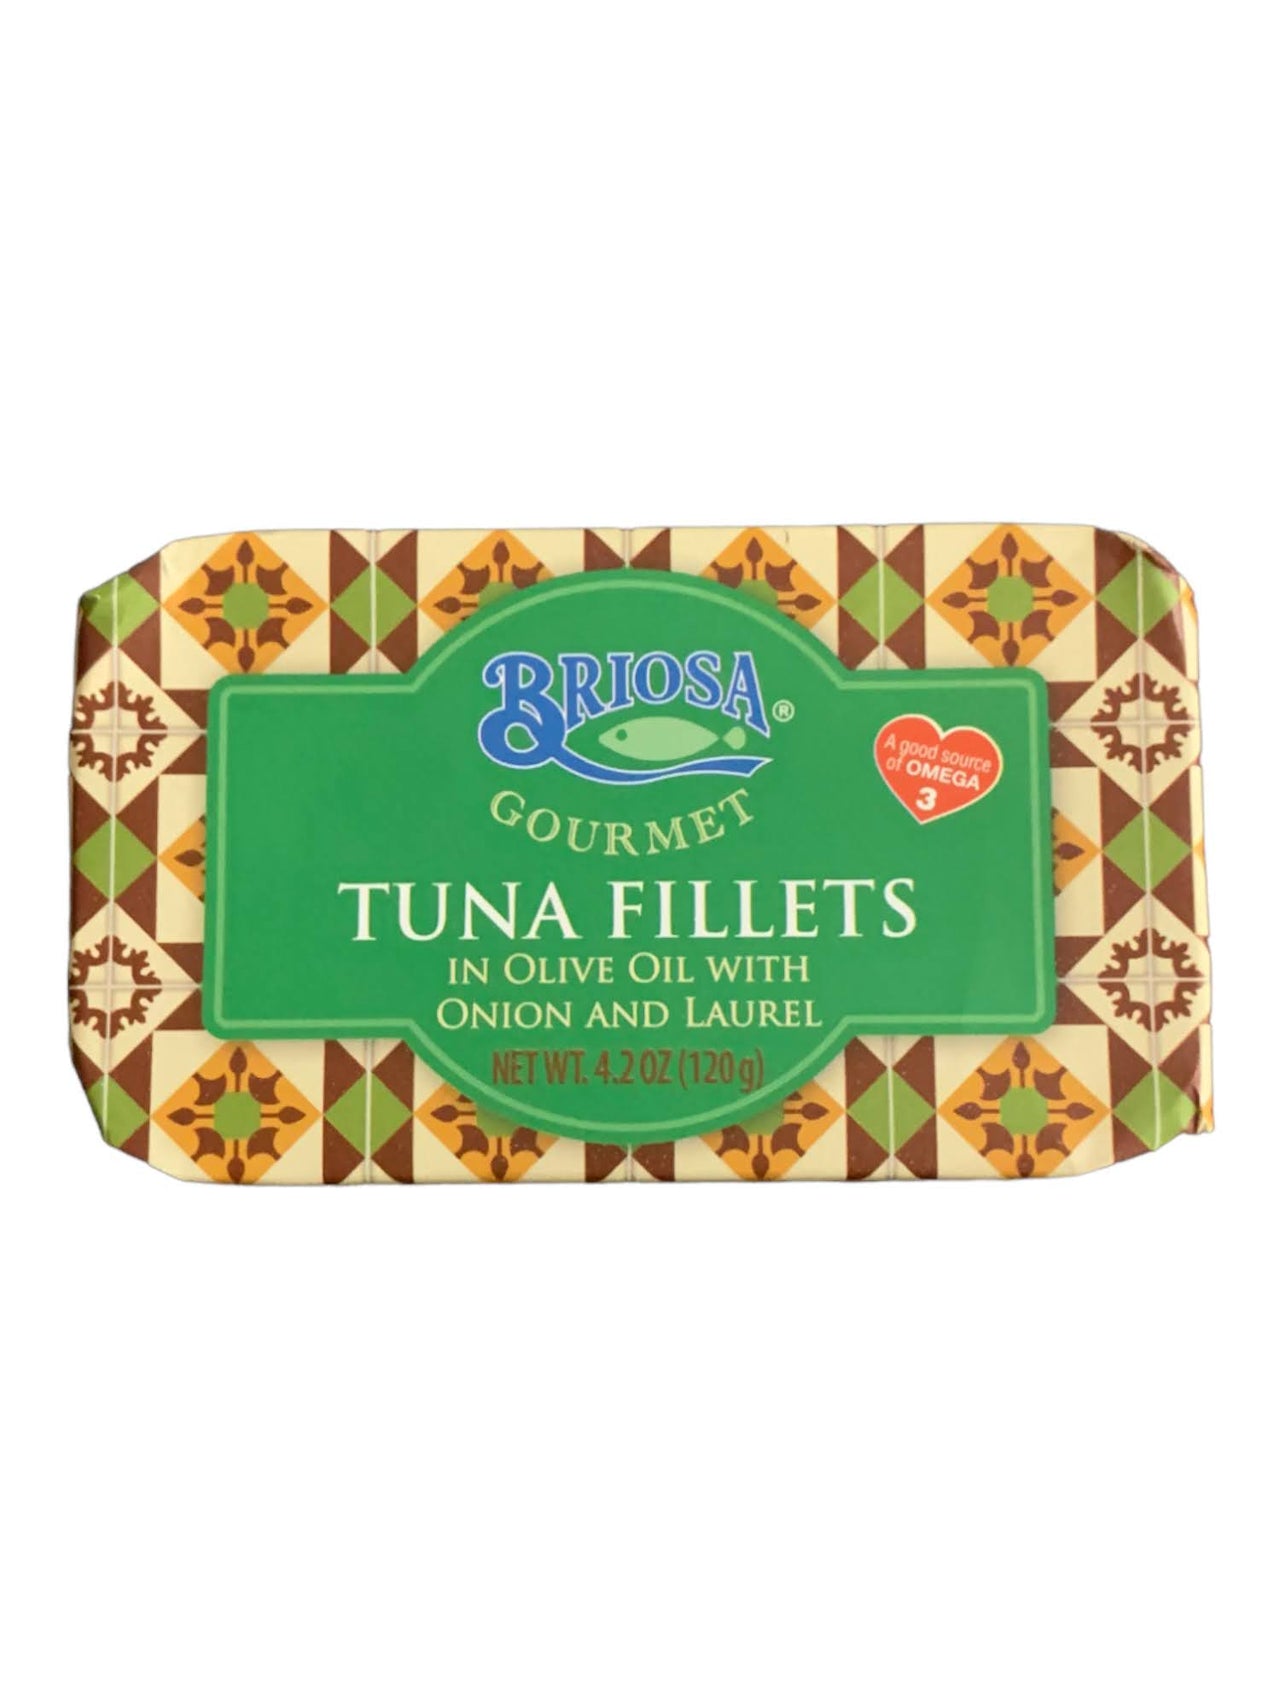 Briosa Gourmet Tuna Fillets in Olive Oil with Onion and Laurel - 3 Pack - TinCanFish